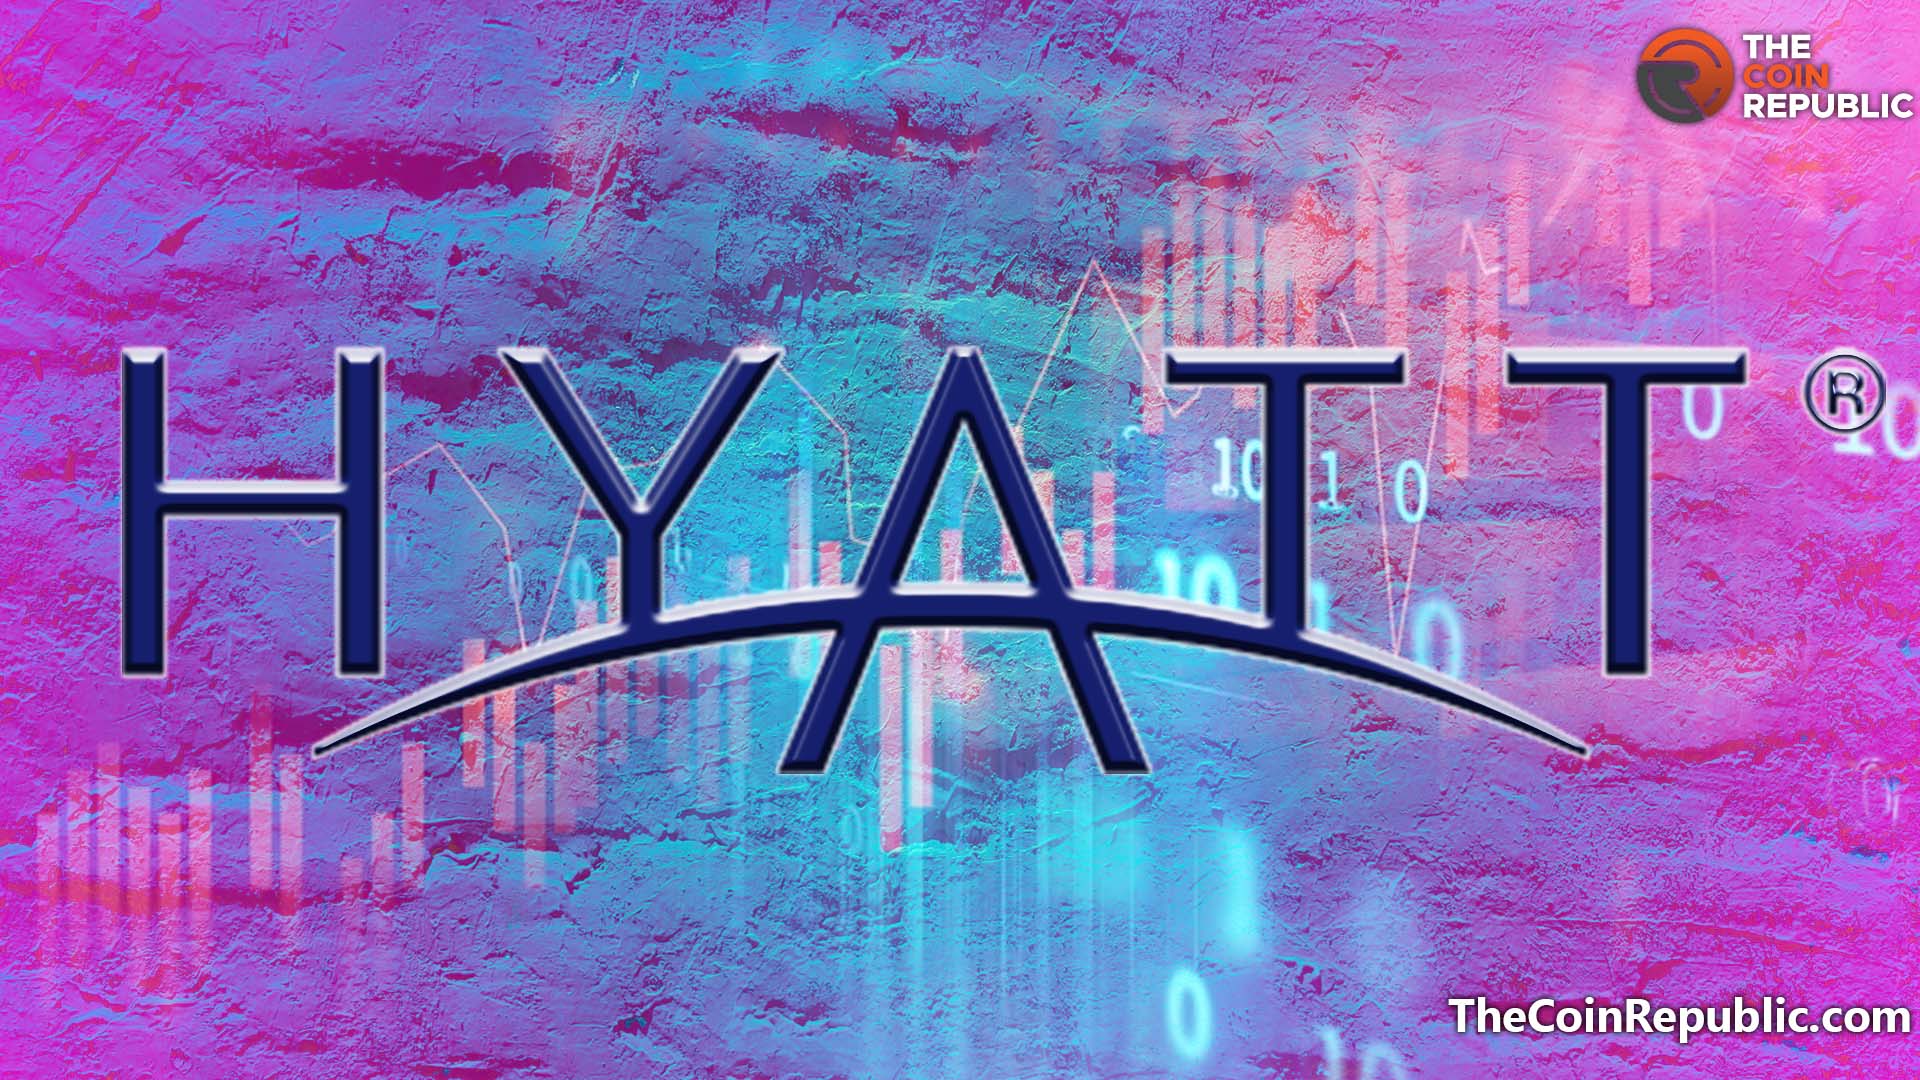 Hyatt Hotels (NYSE: H) to Spread its Tentacles Across the Globe